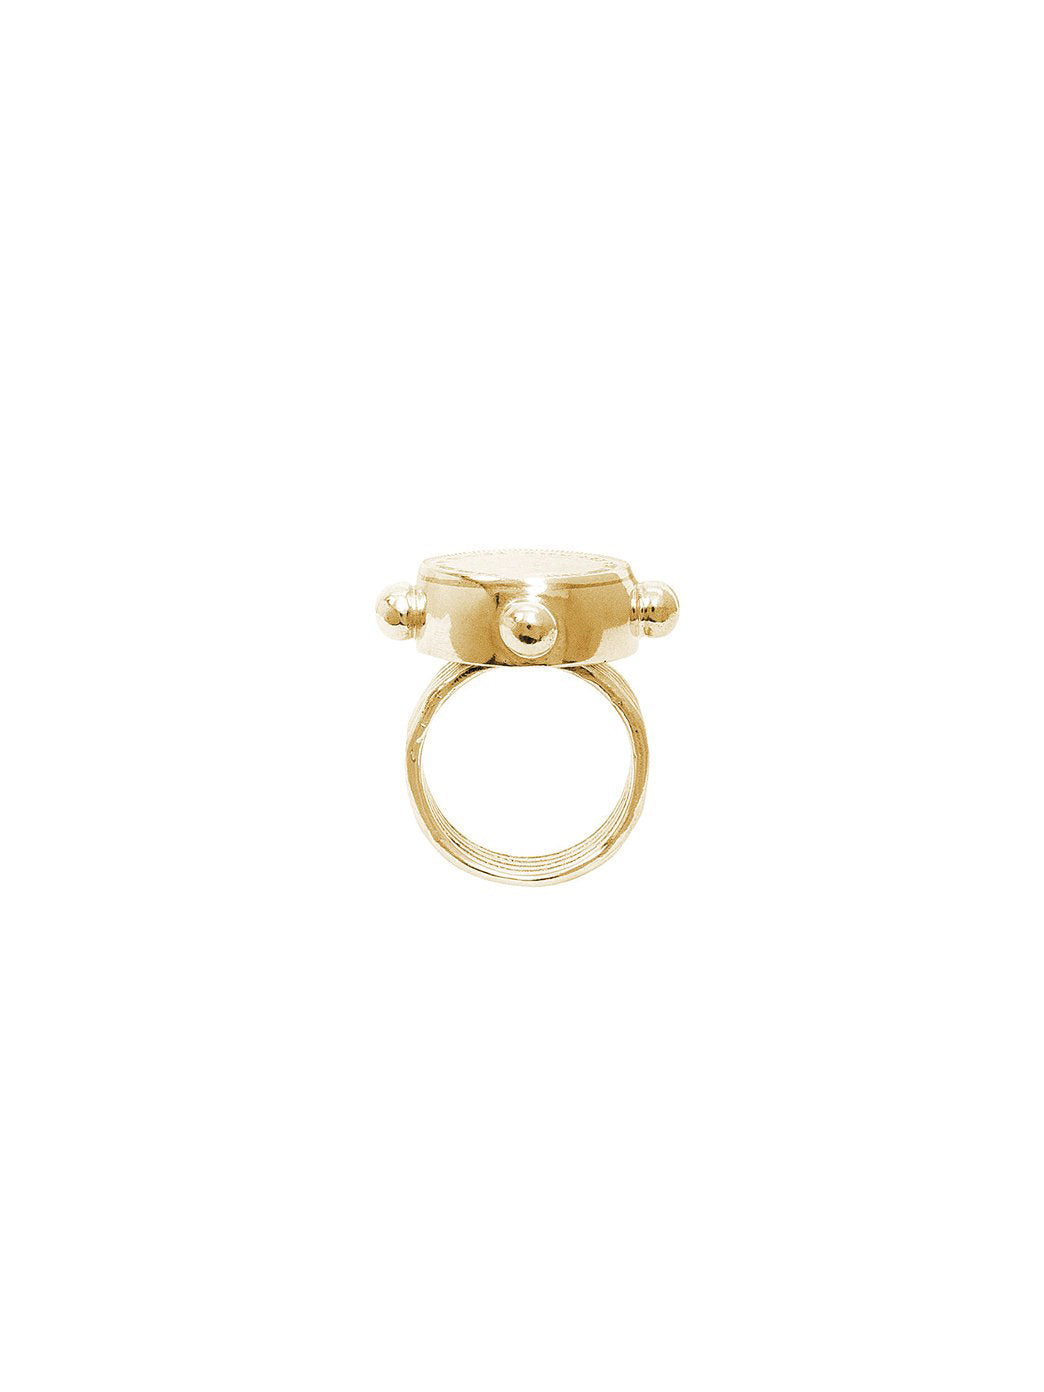 Fiorina Jewellery Gold Pinkie Ring Side